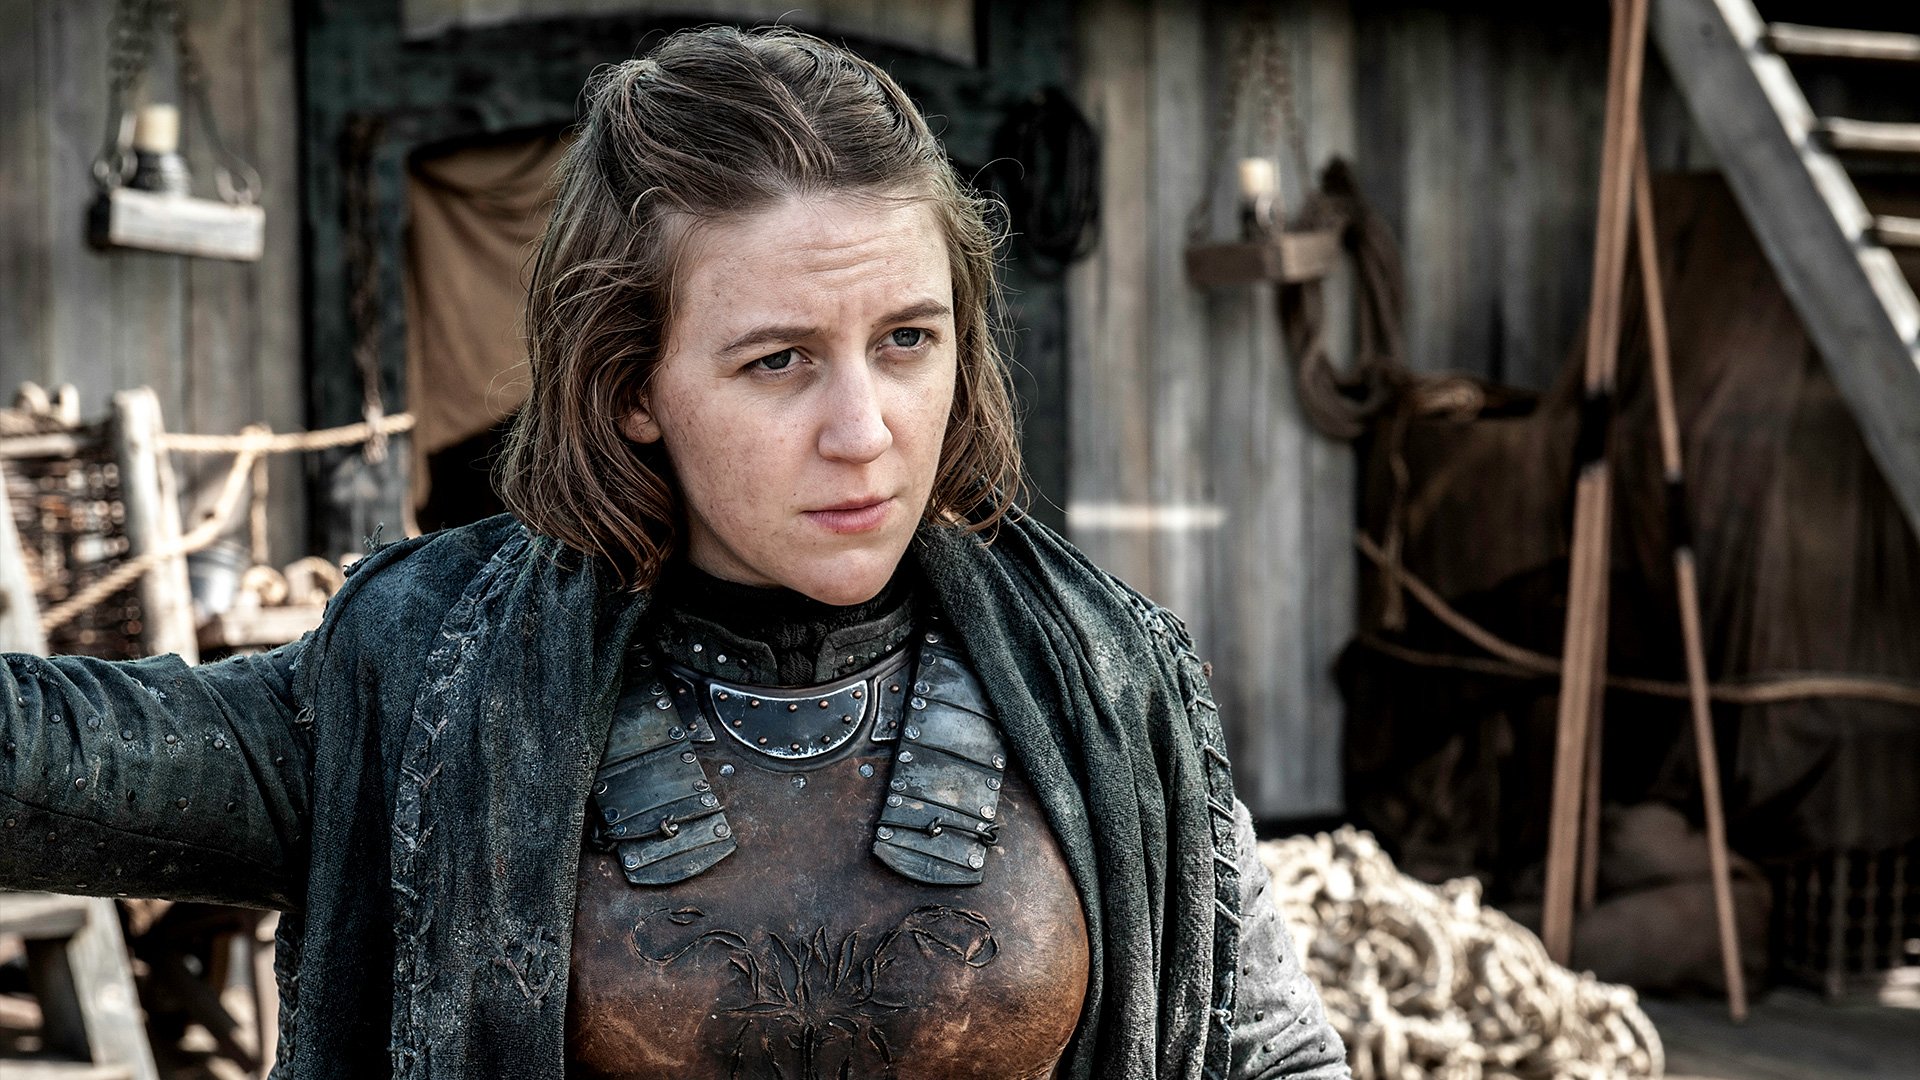 ‘Game of Thrones’: The Worst Casting Choices